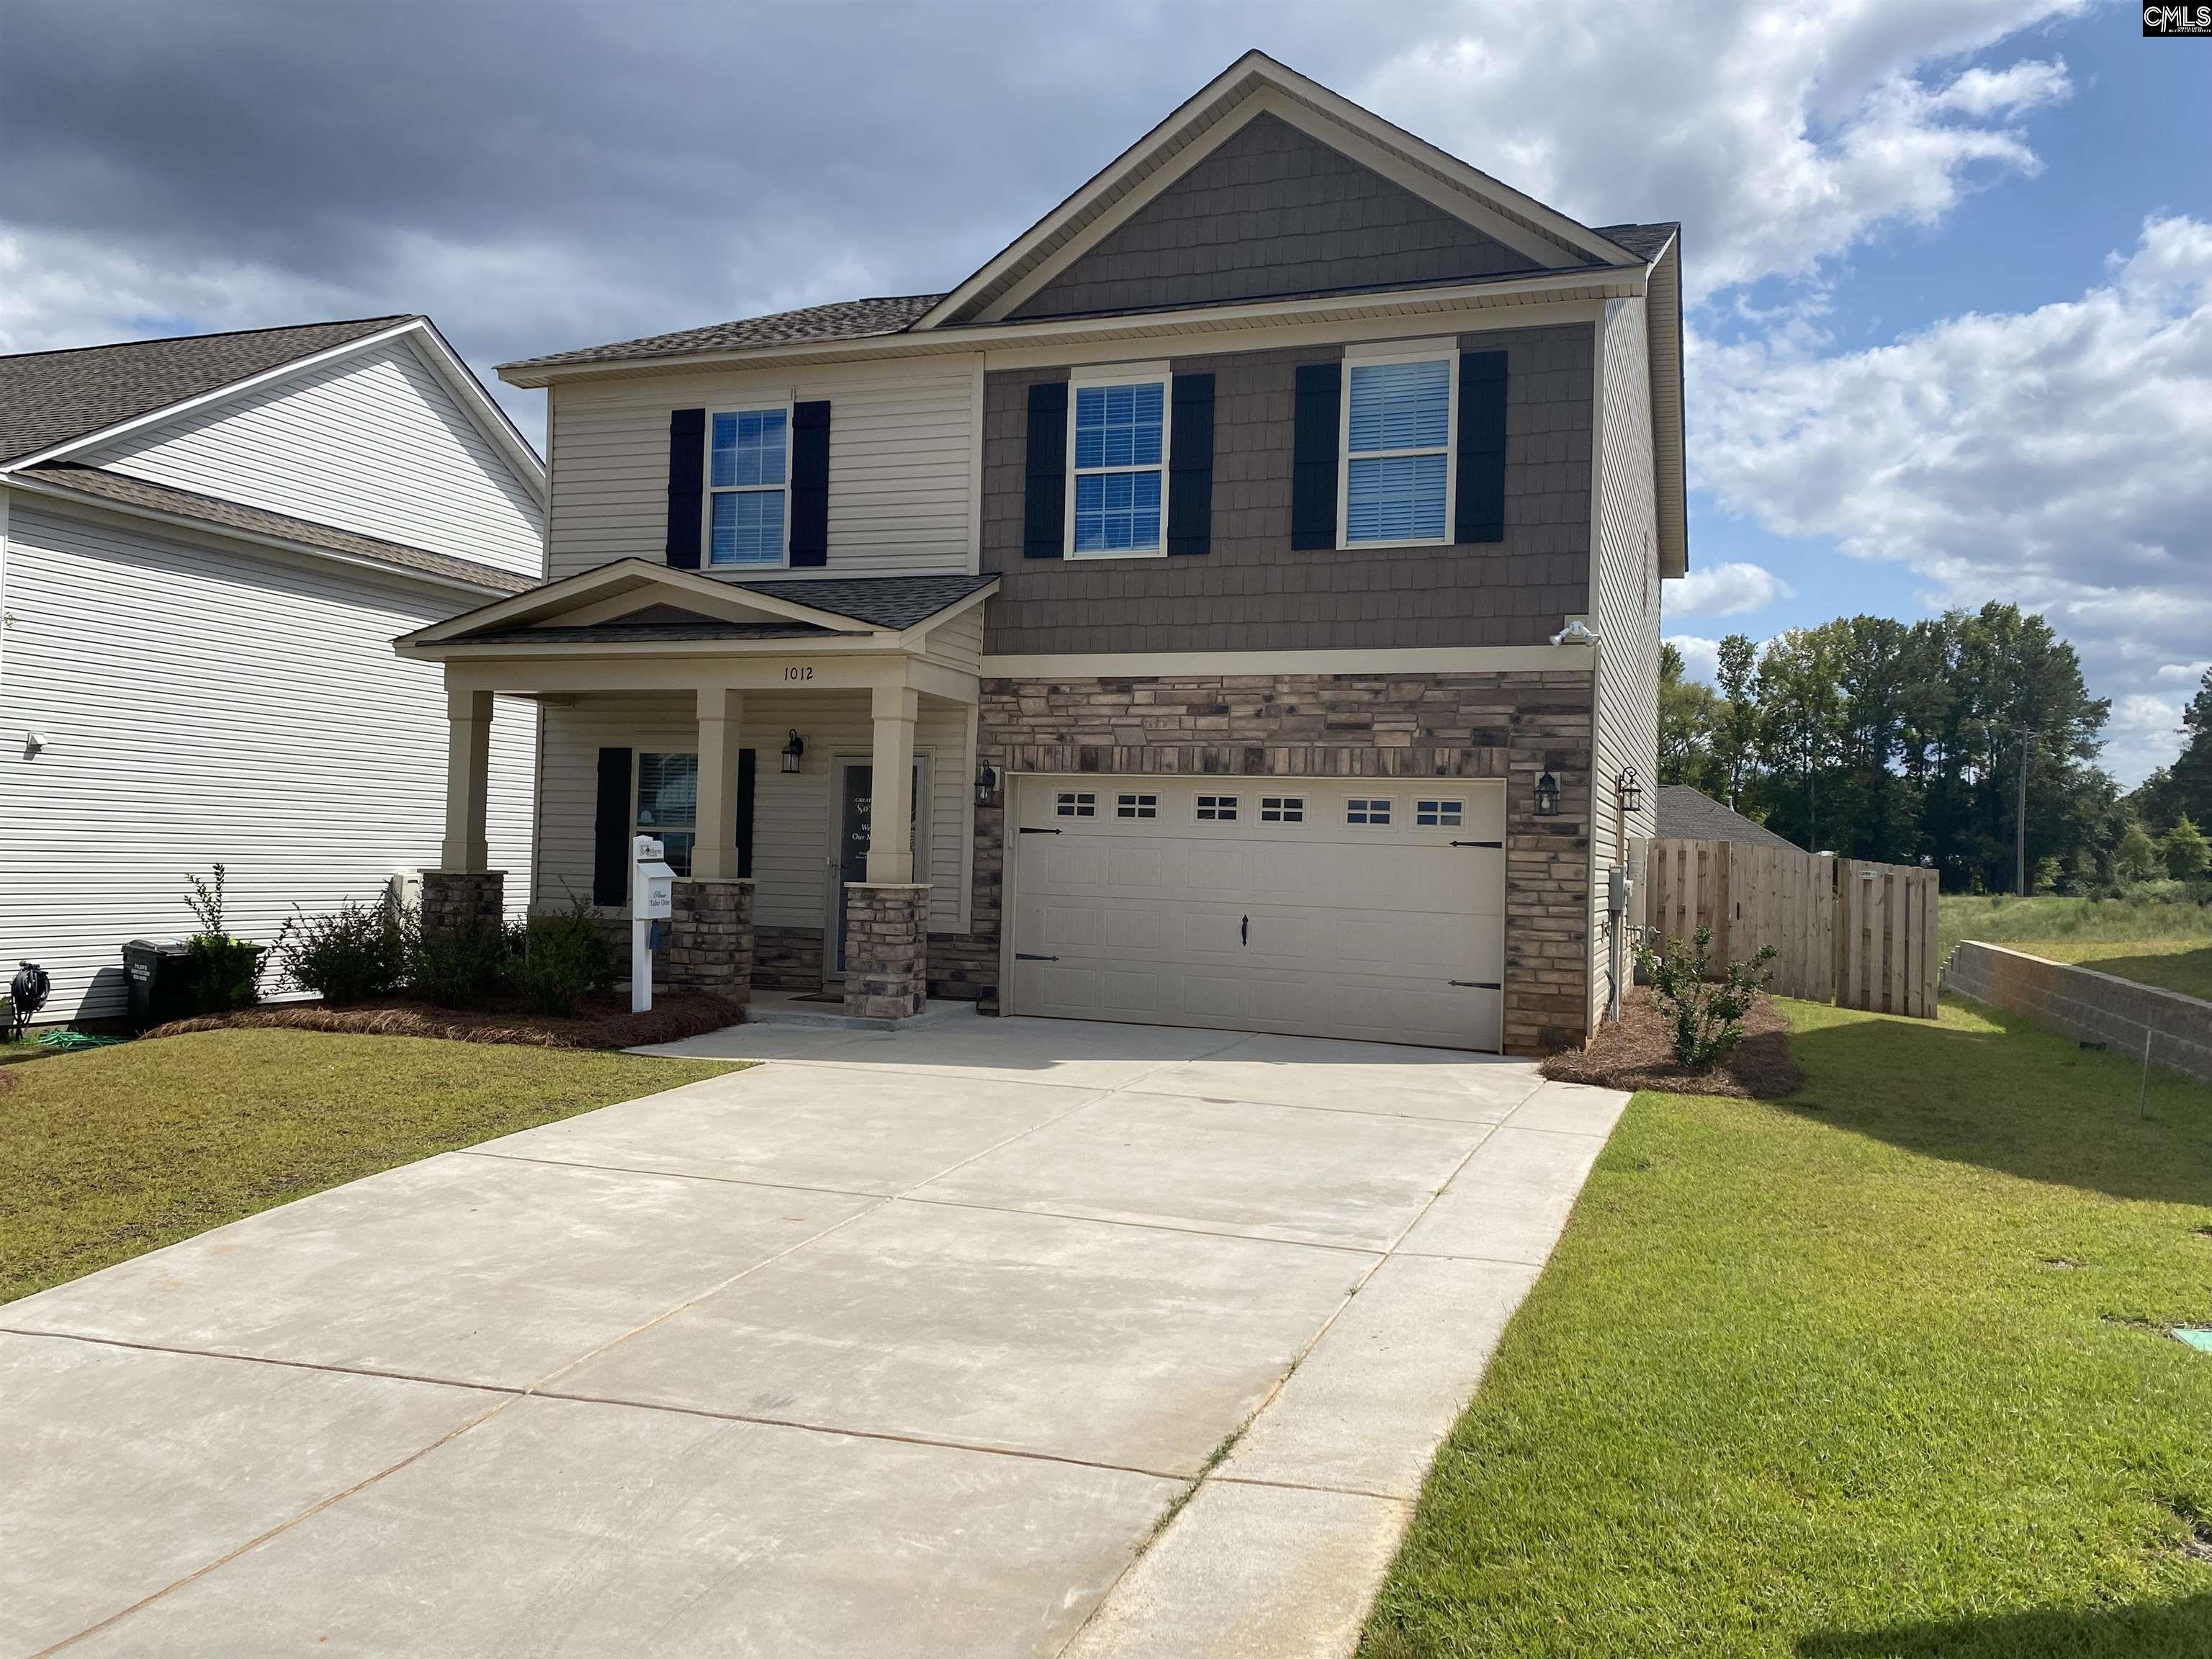 1012 Old Town Road, Irmo, SC 29063